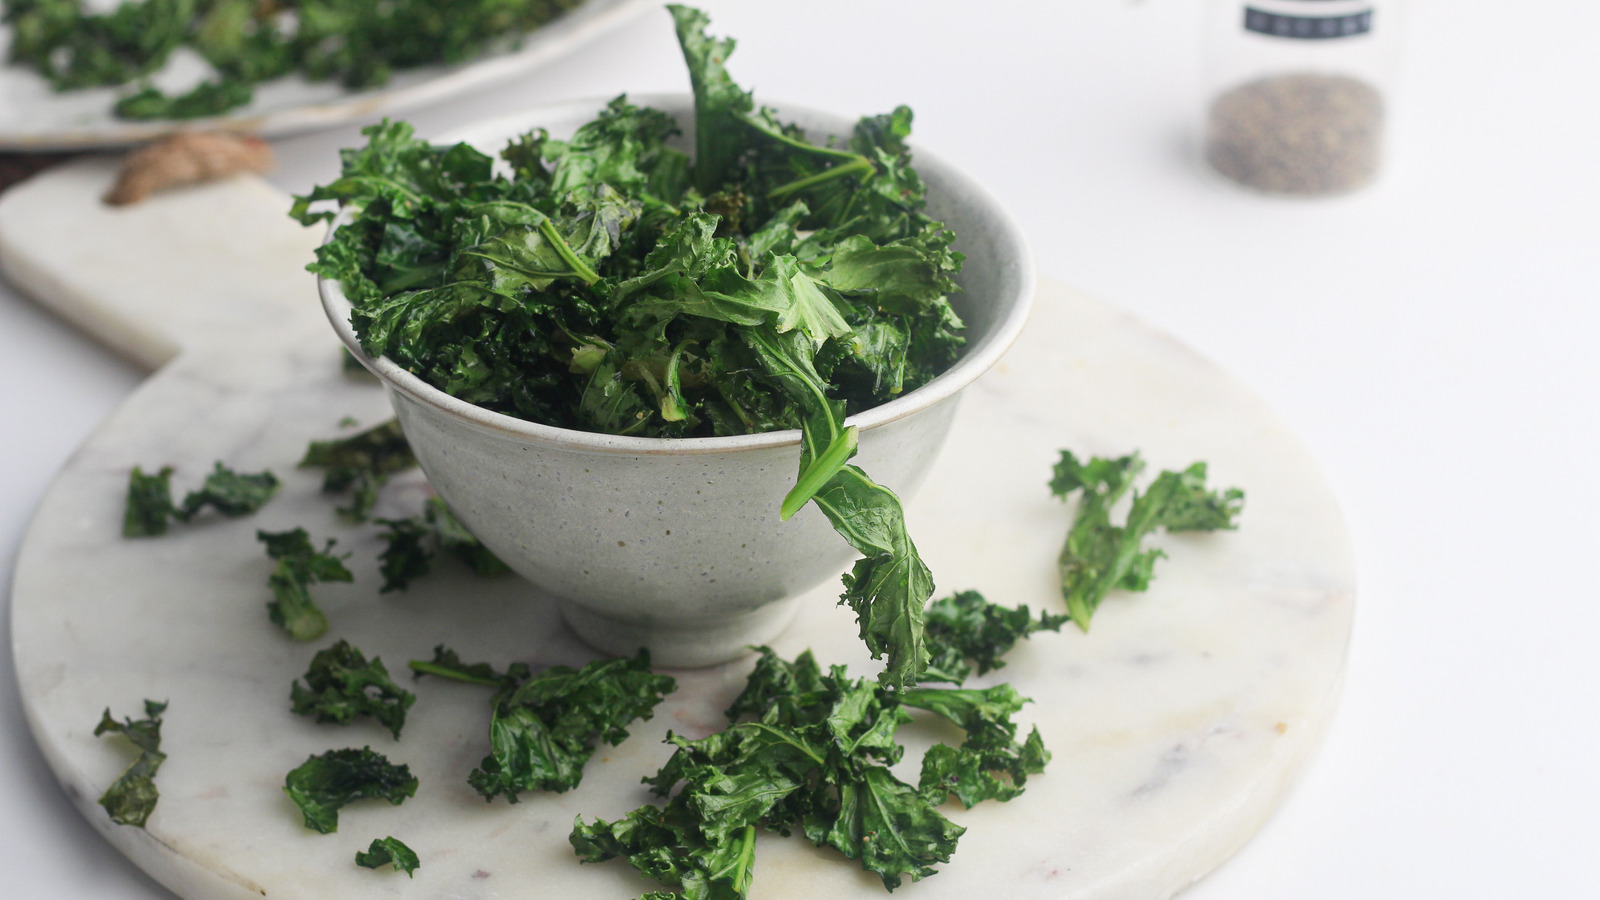 https://www.mashed.com/img/gallery/air-fryer-kale-chips-recipe/l-intro-1629913862.jpg